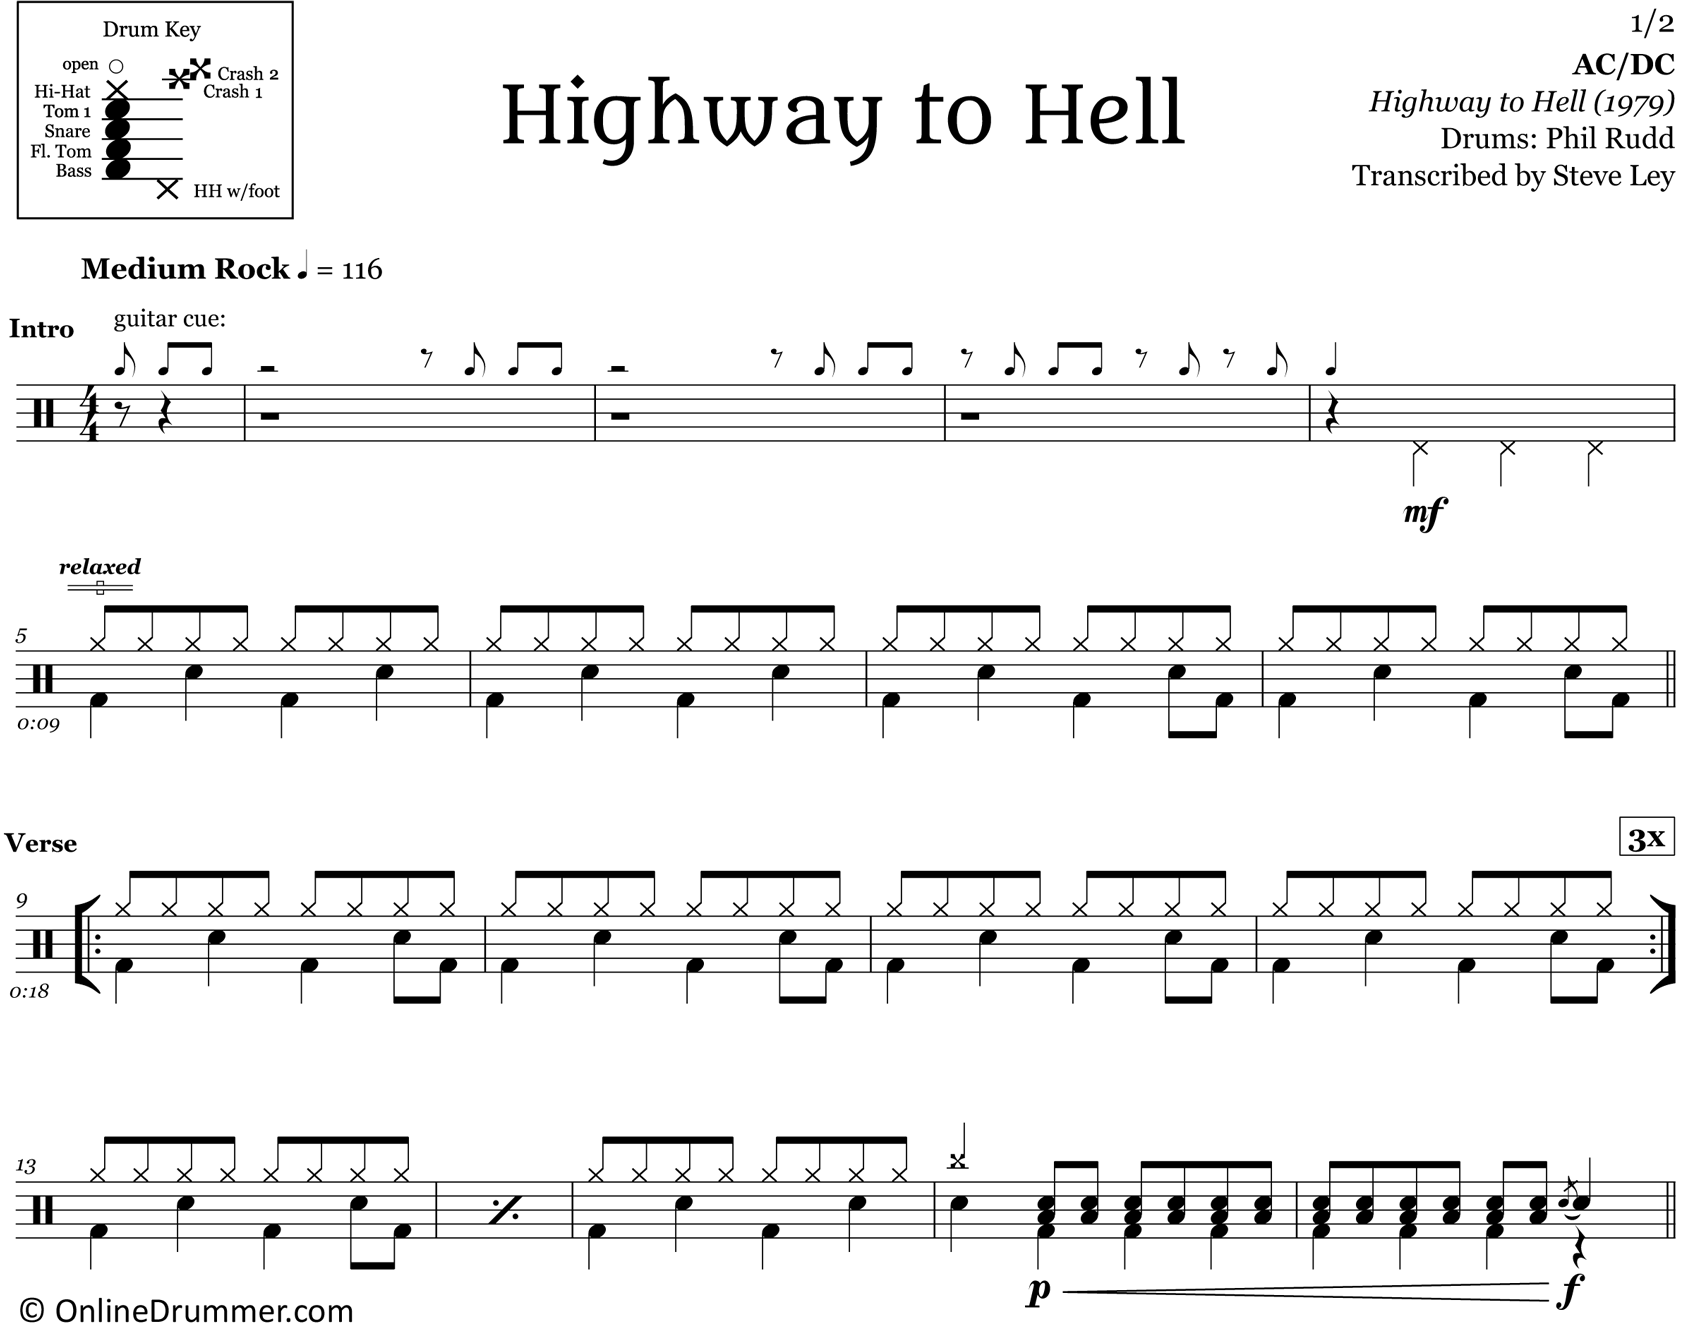 Highway To Hell - AC/DC - Drum Sheet Music